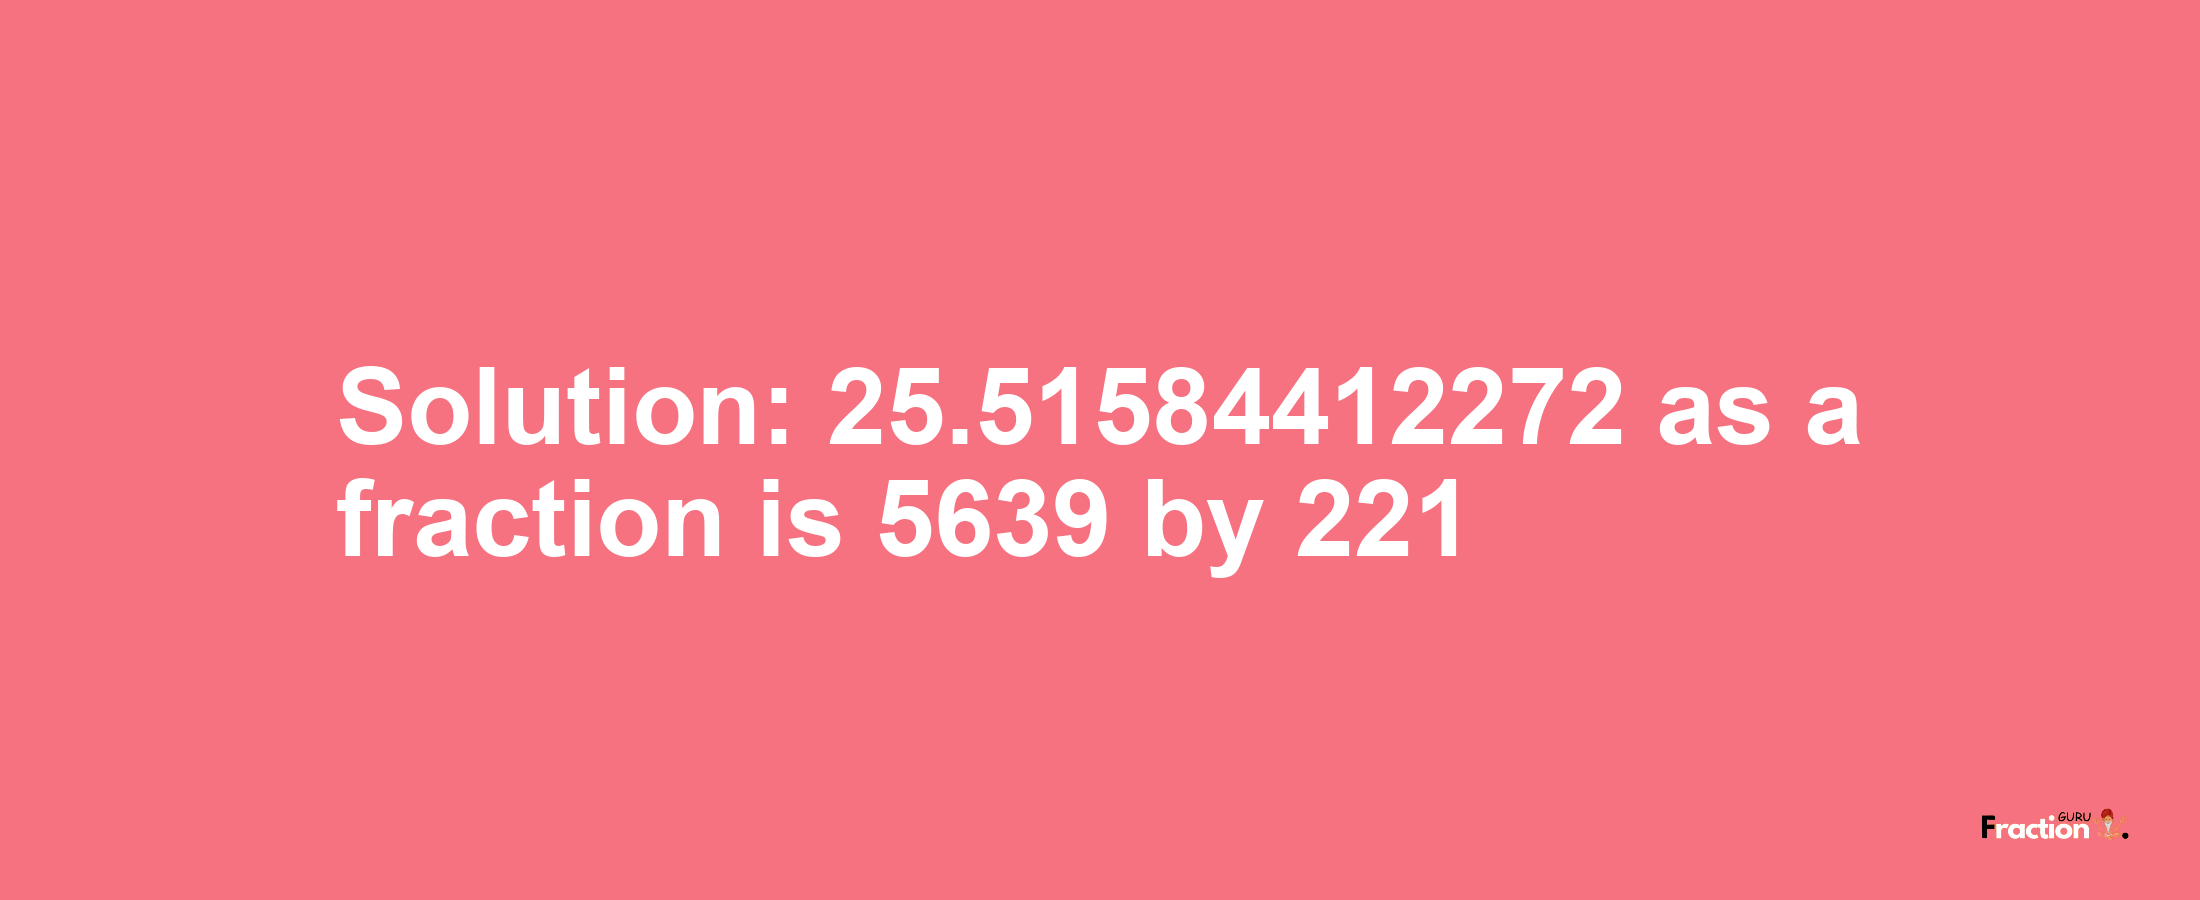 Solution:25.51584412272 as a fraction is 5639/221